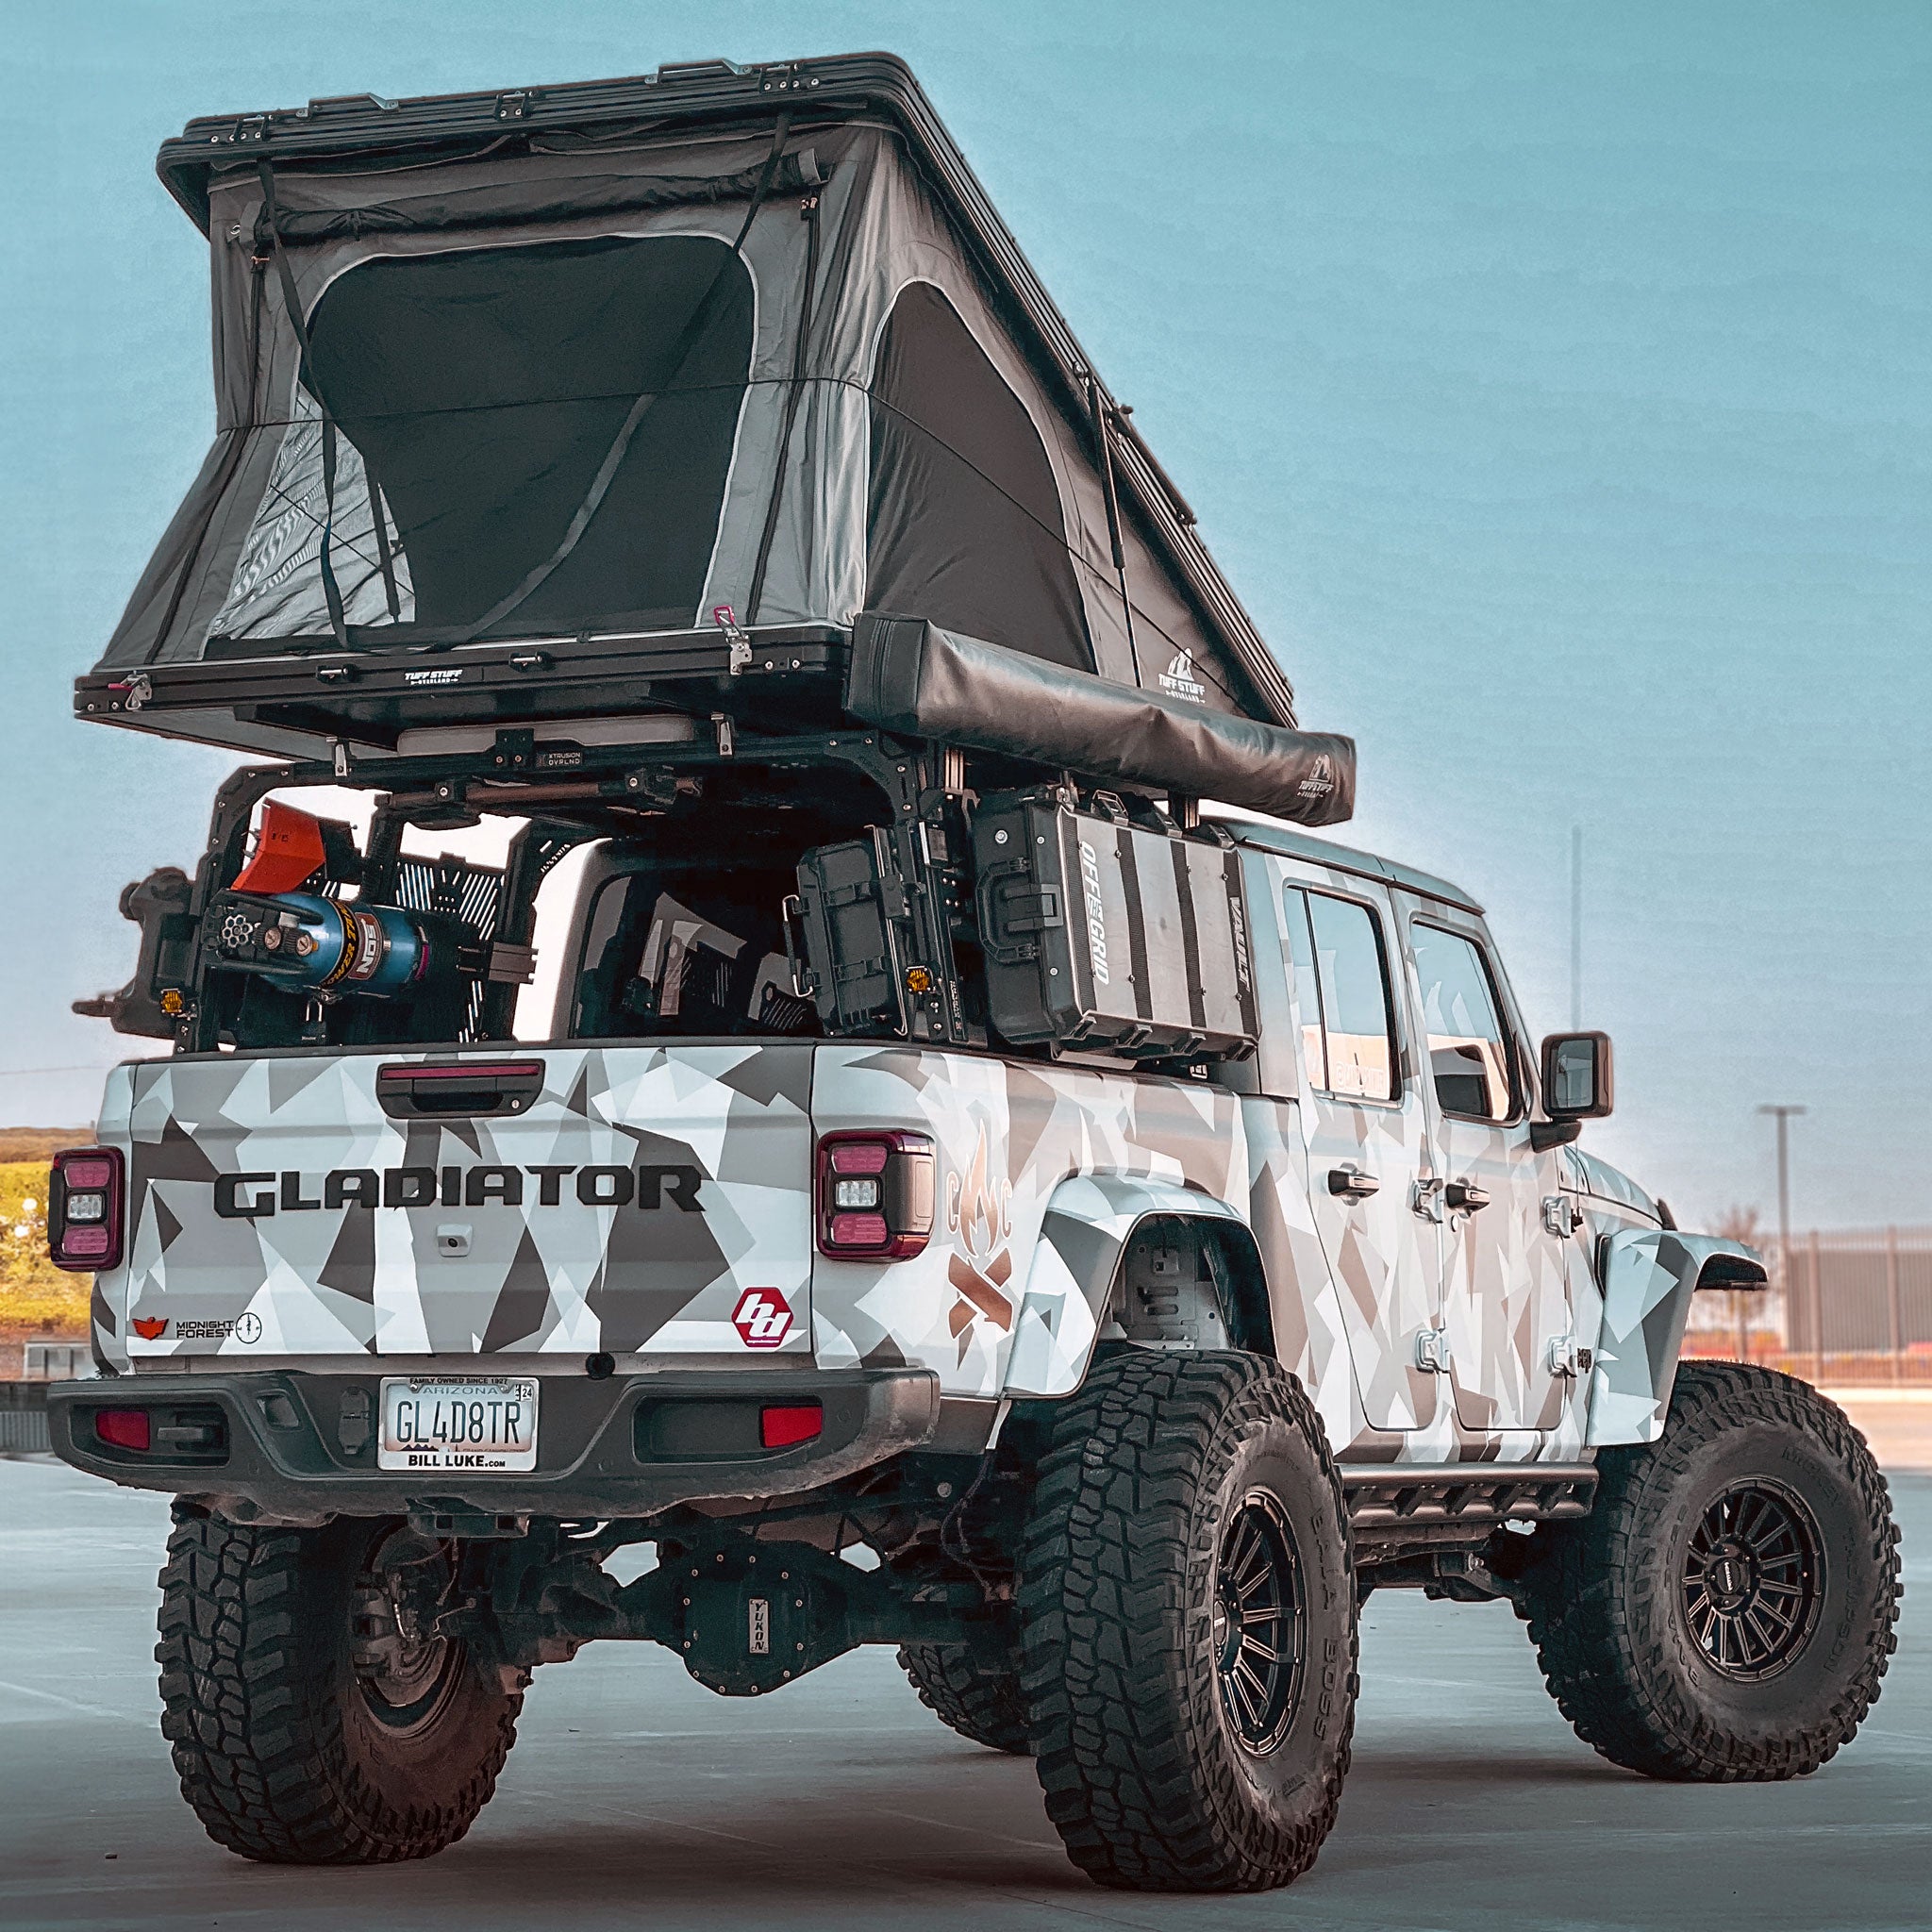 Built Jeep Gladiator with 9 Degree XTR3 - 22 inch high bed rack, open roof top tent, awning, storage cases, shovel, Power Tank, and off-road gear.